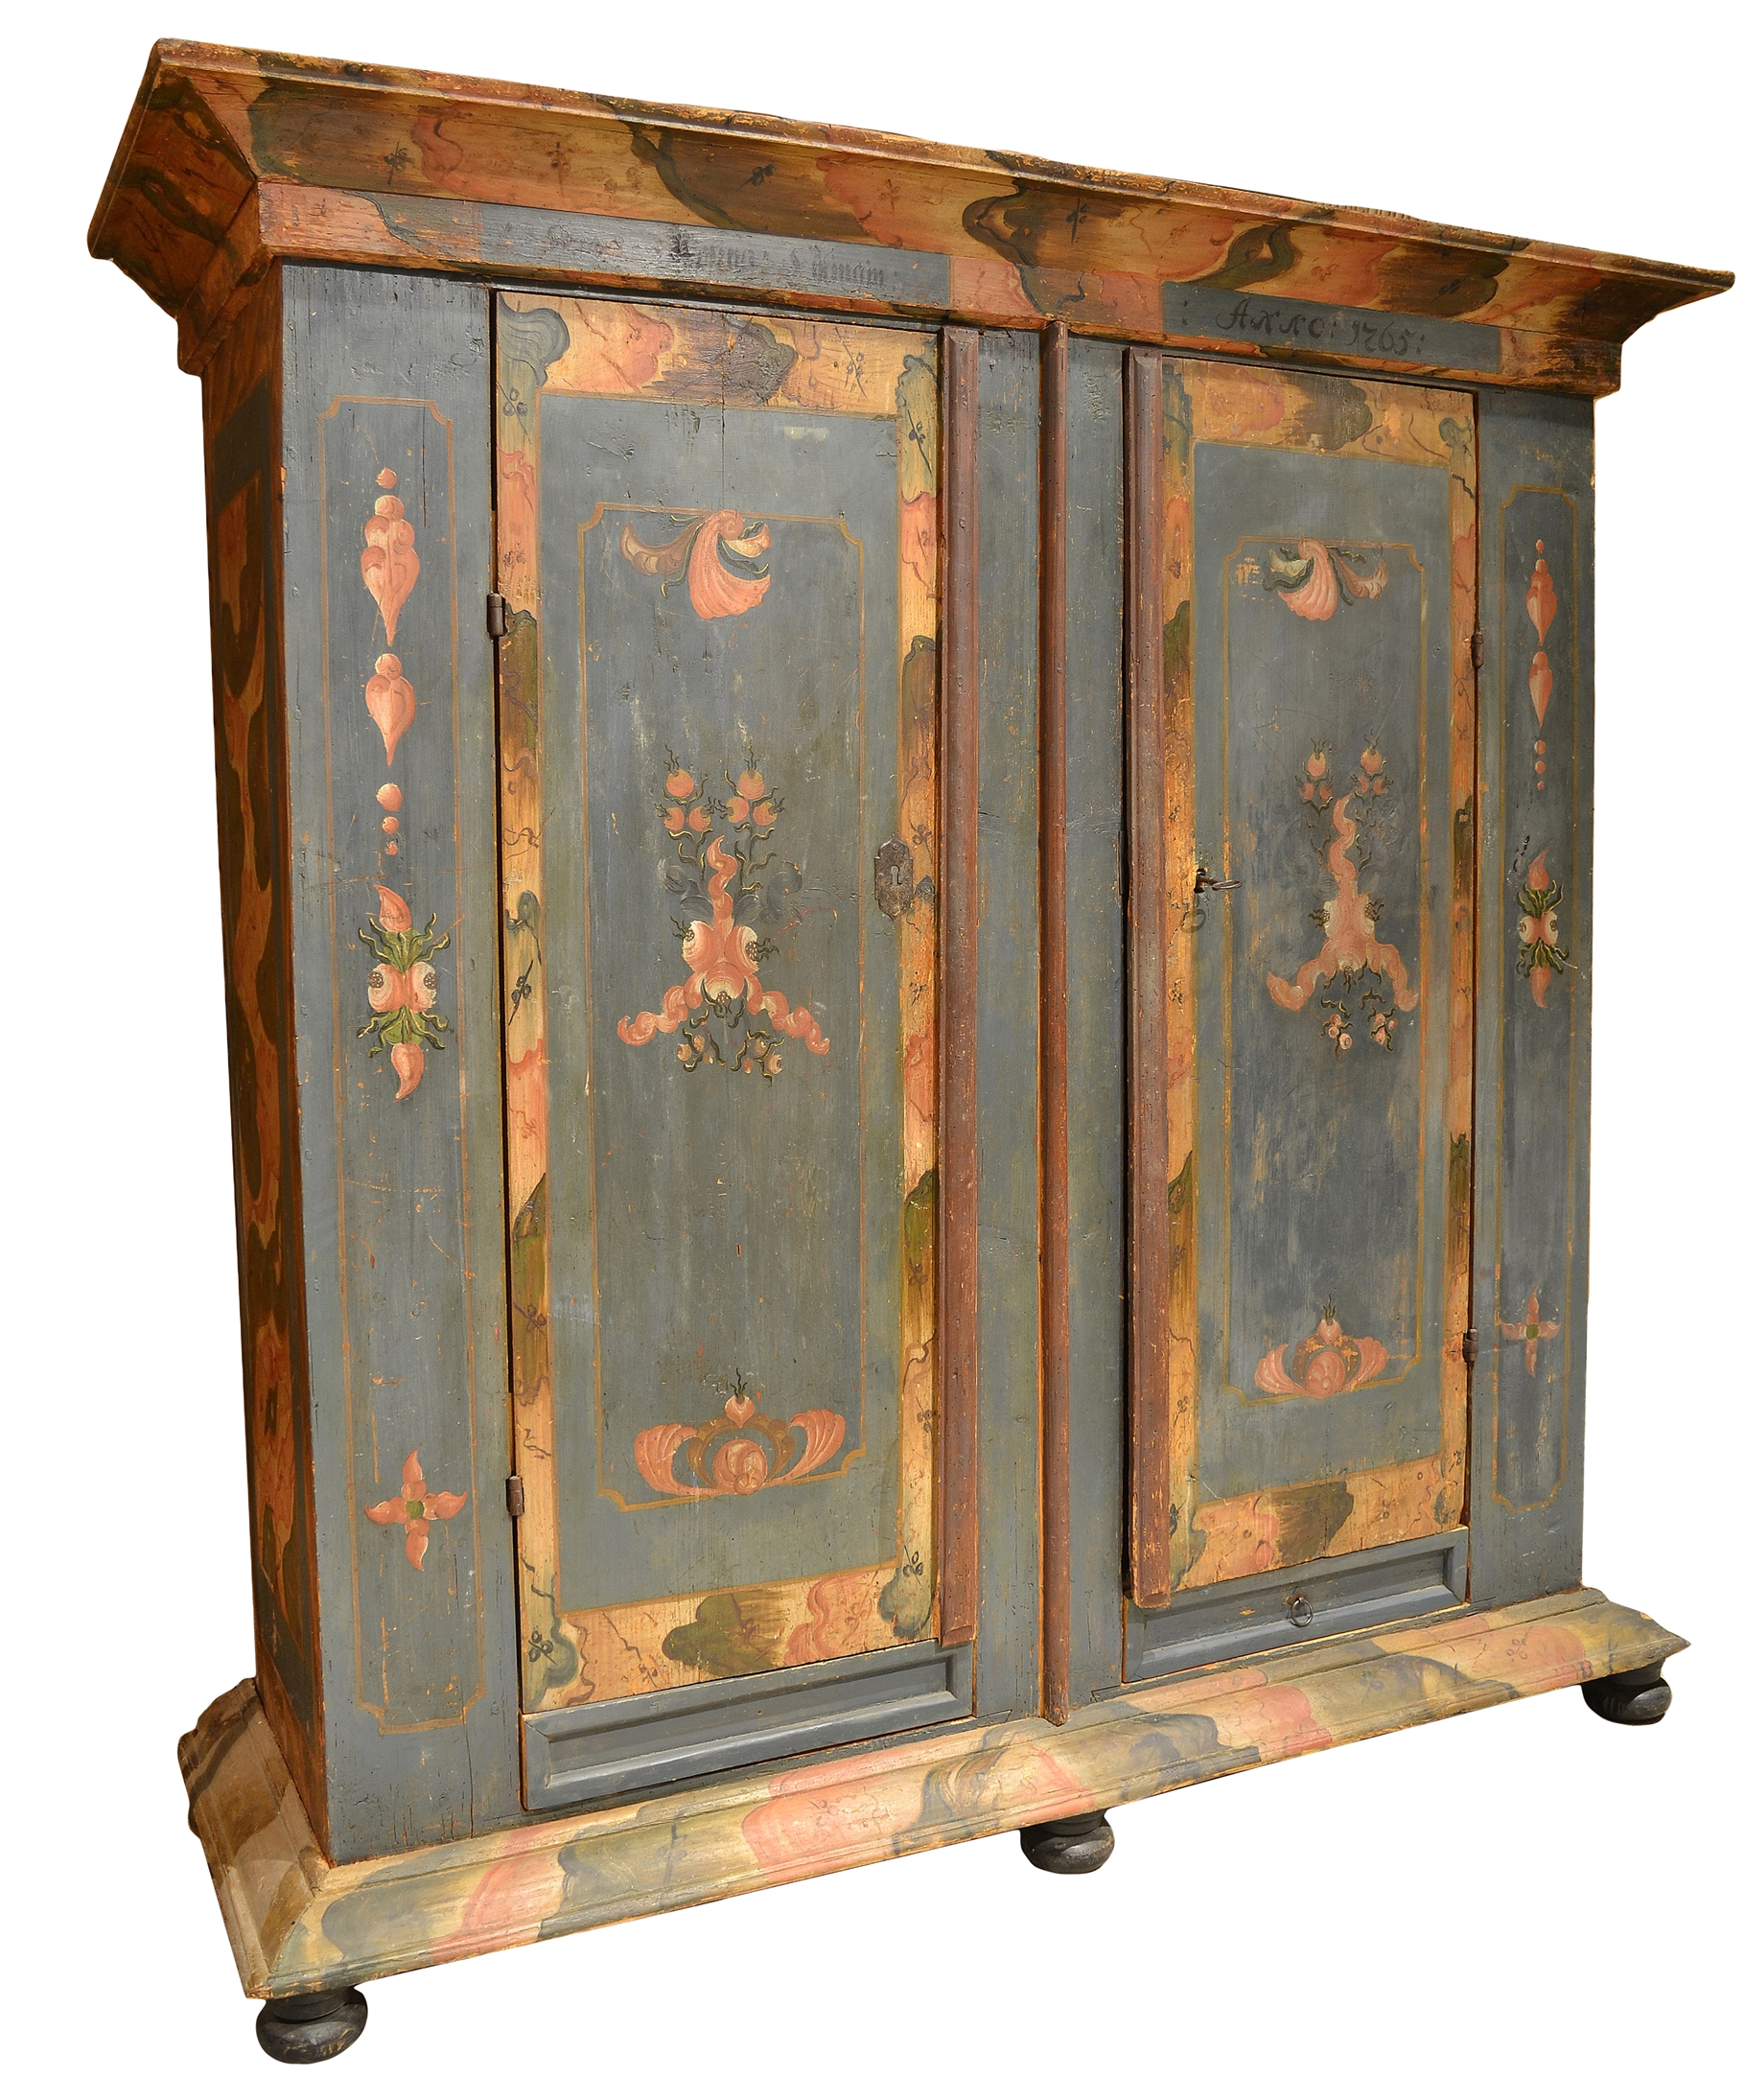 128/2027 - Painted Dutch Cabinet